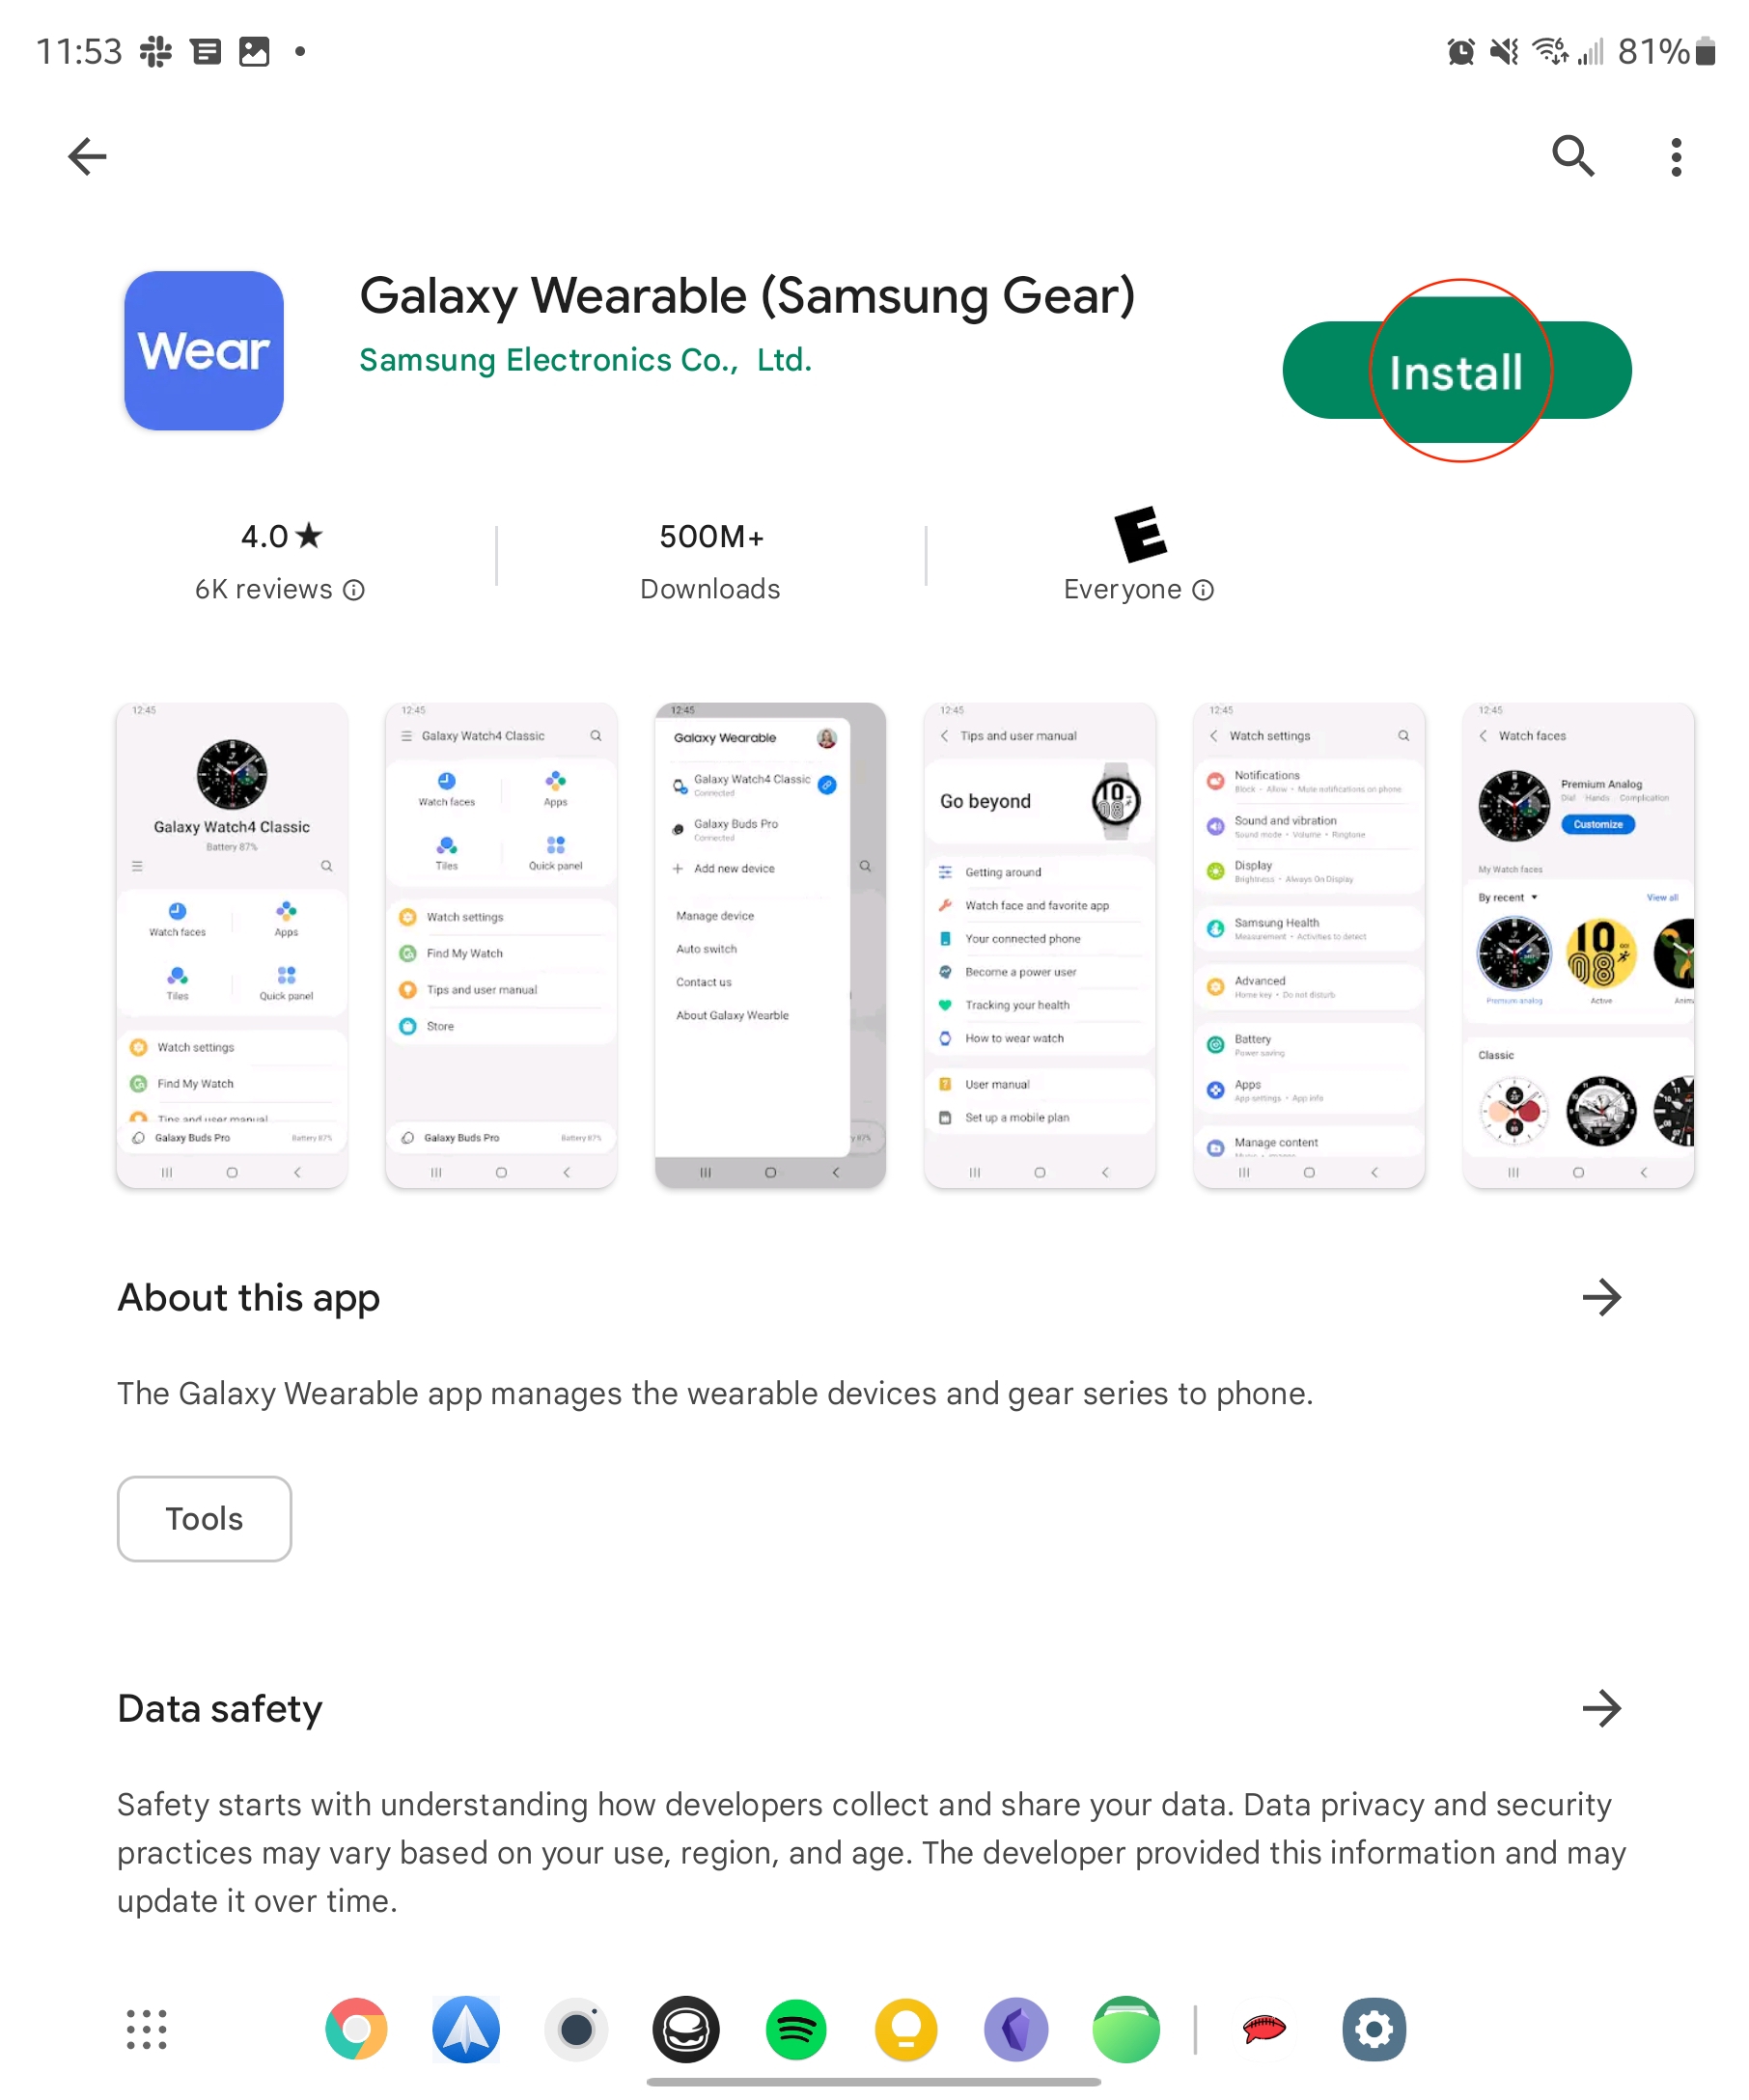 Galaxy Wearable Play Store listing